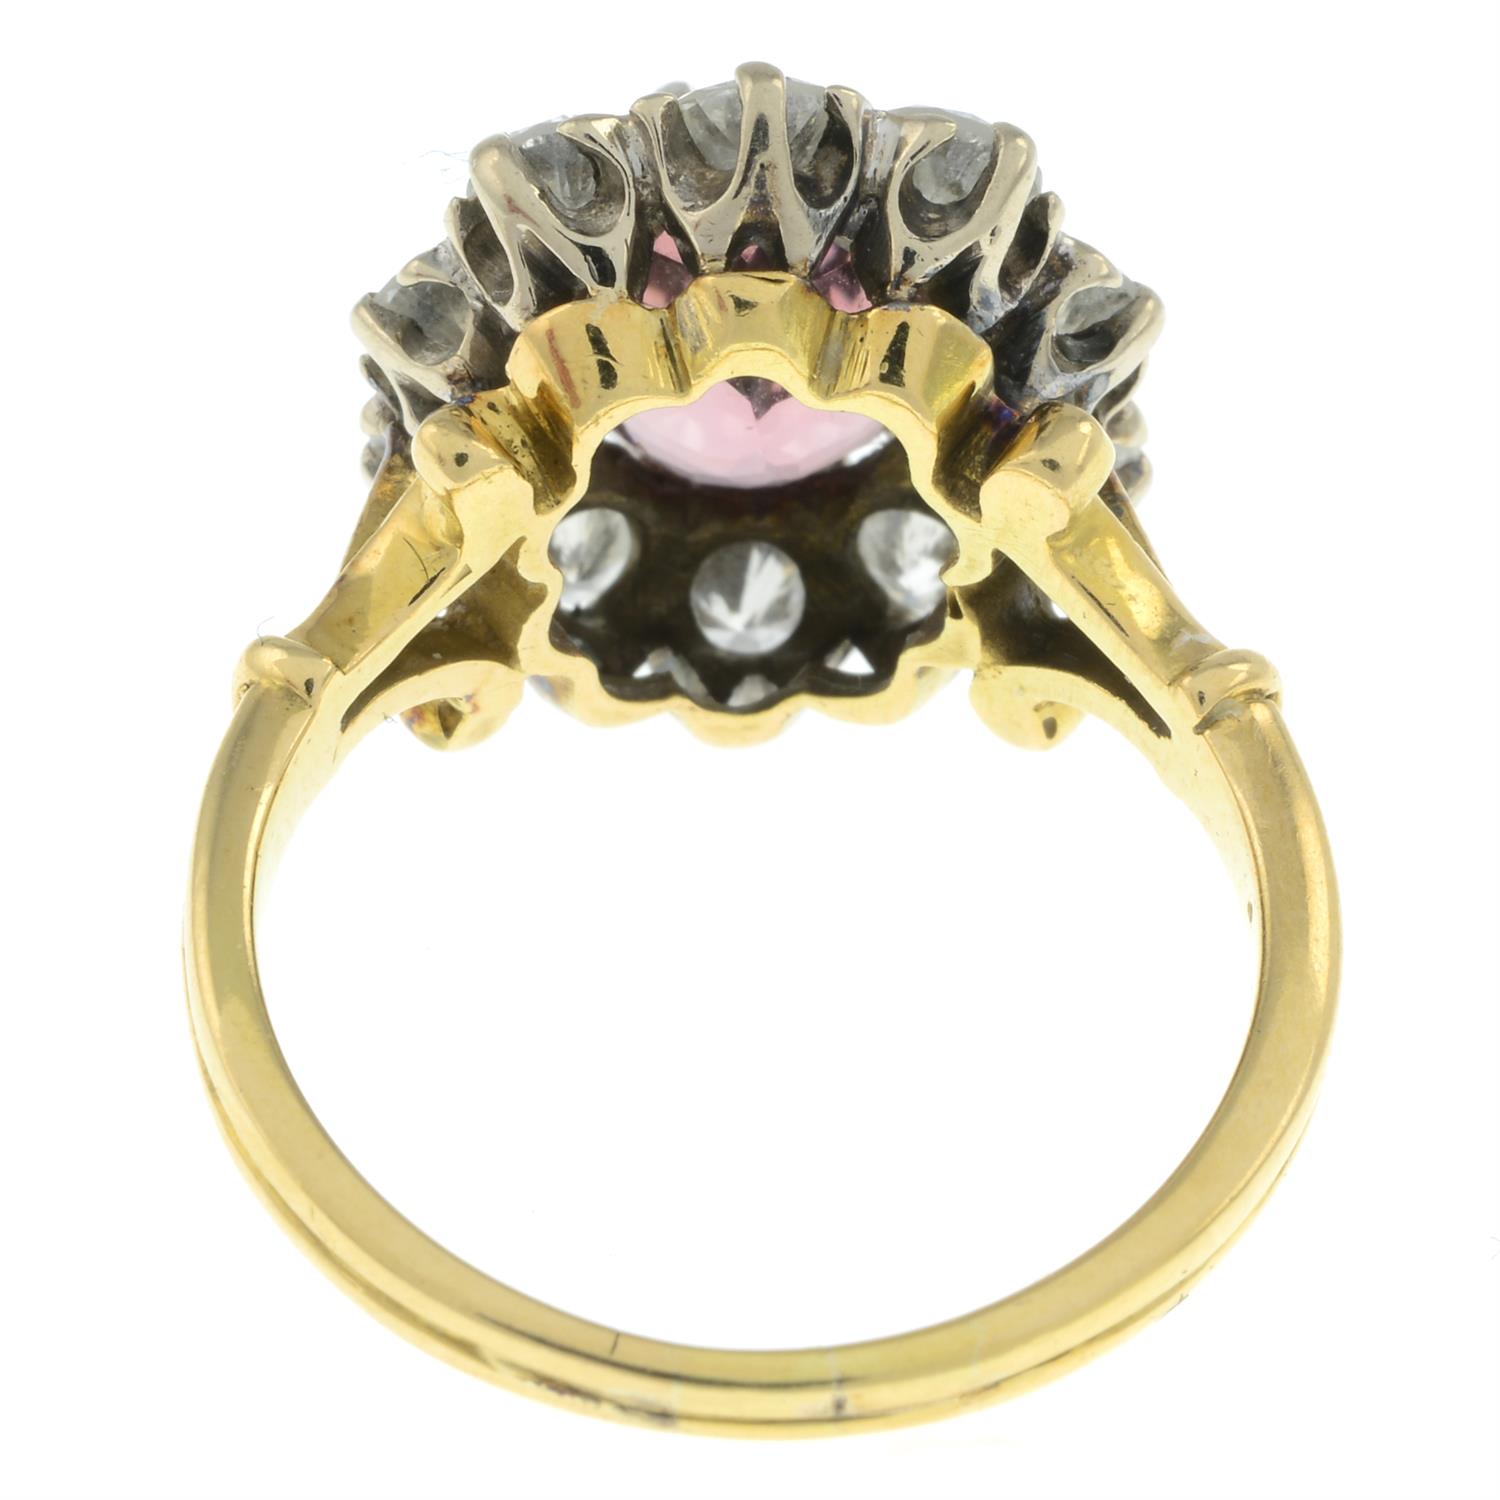 Pink tourmaline and diamond cluster ring - Image 3 of 5